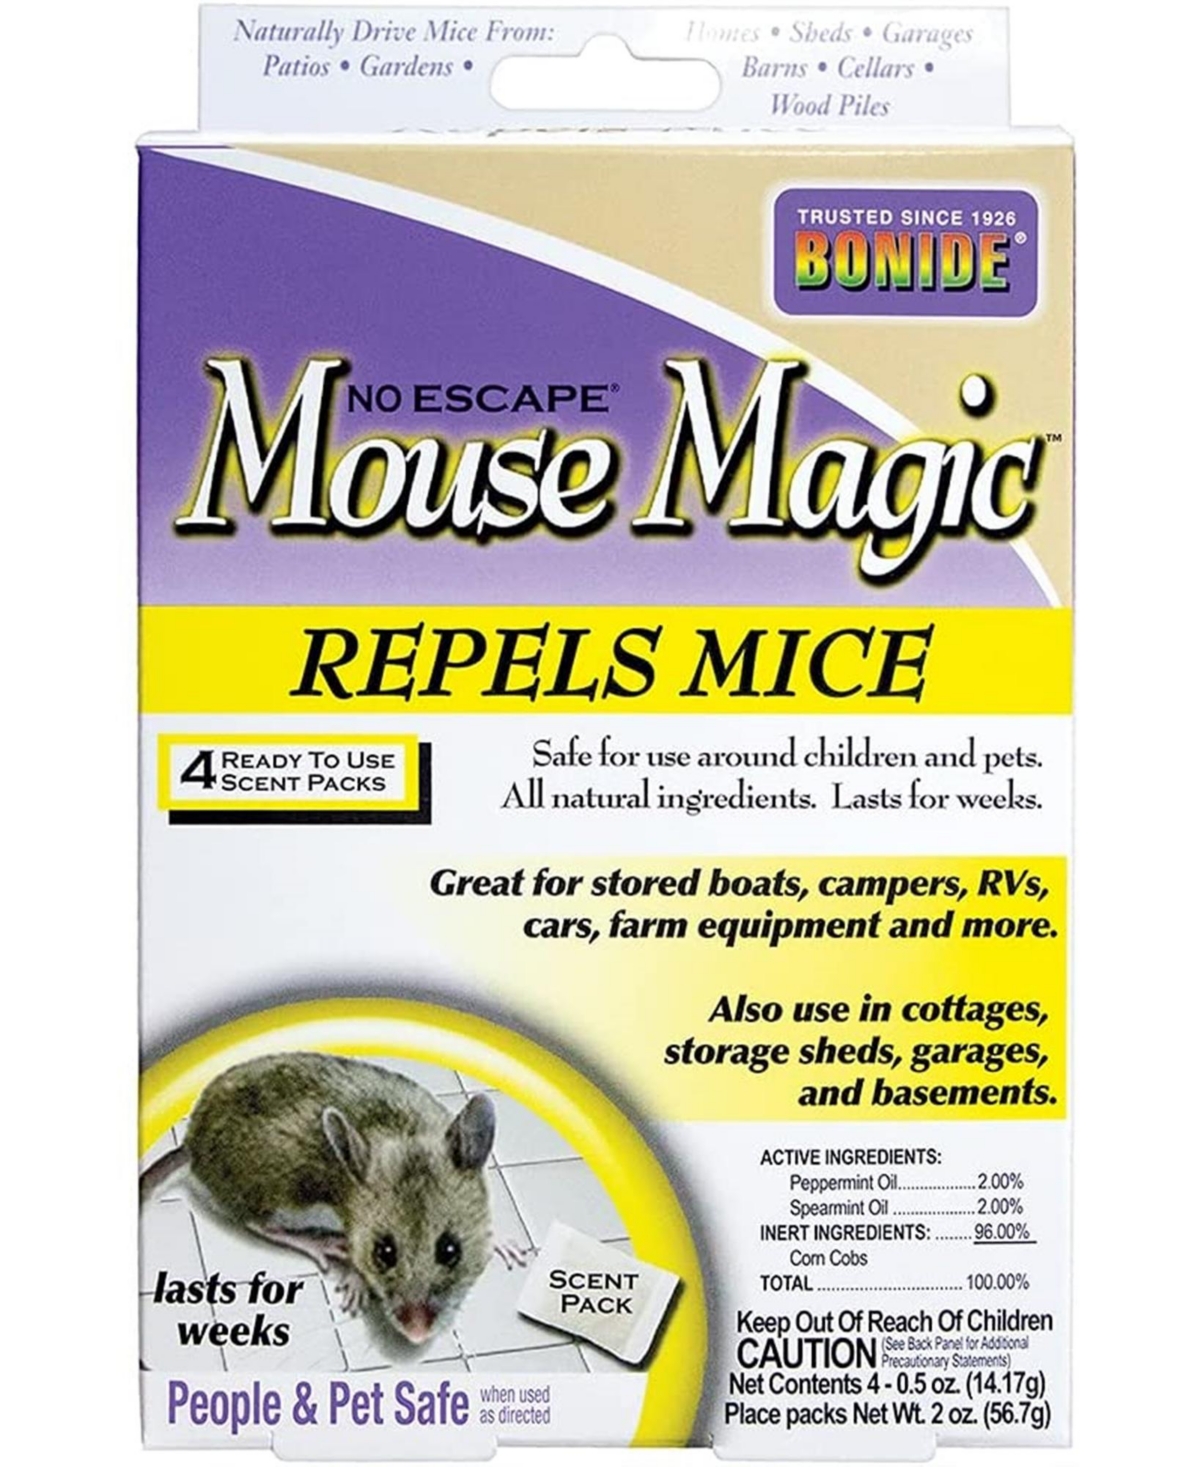 Bonide Mouse Magic Ready-to-Use Scent Packs, 4 Scent Packs